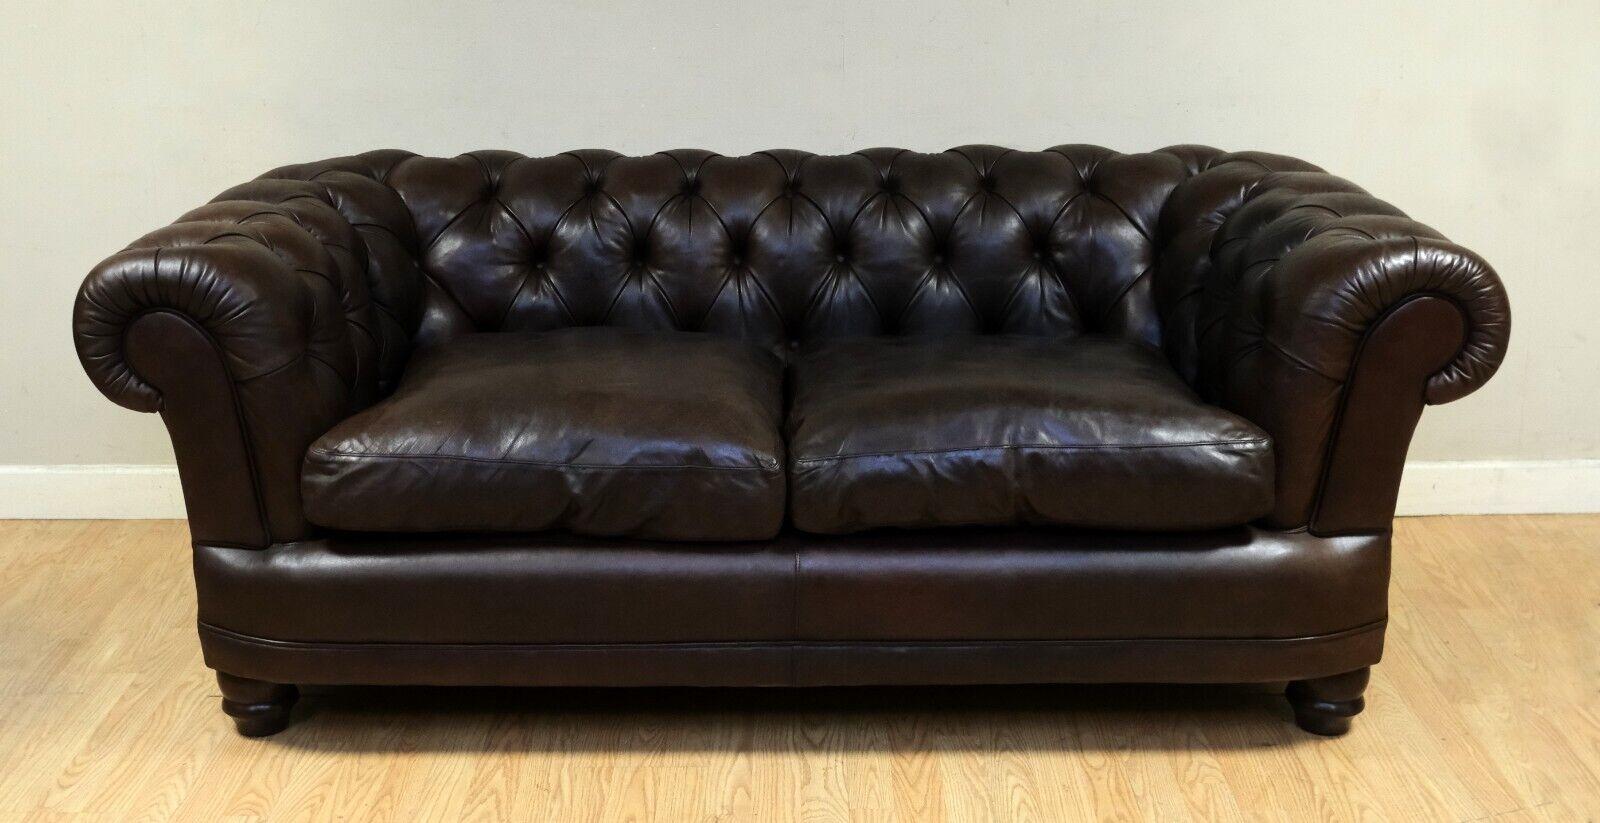 English Choclate Brown Chesterfield Two Seater Leather Sofa Feather Filled Cushions